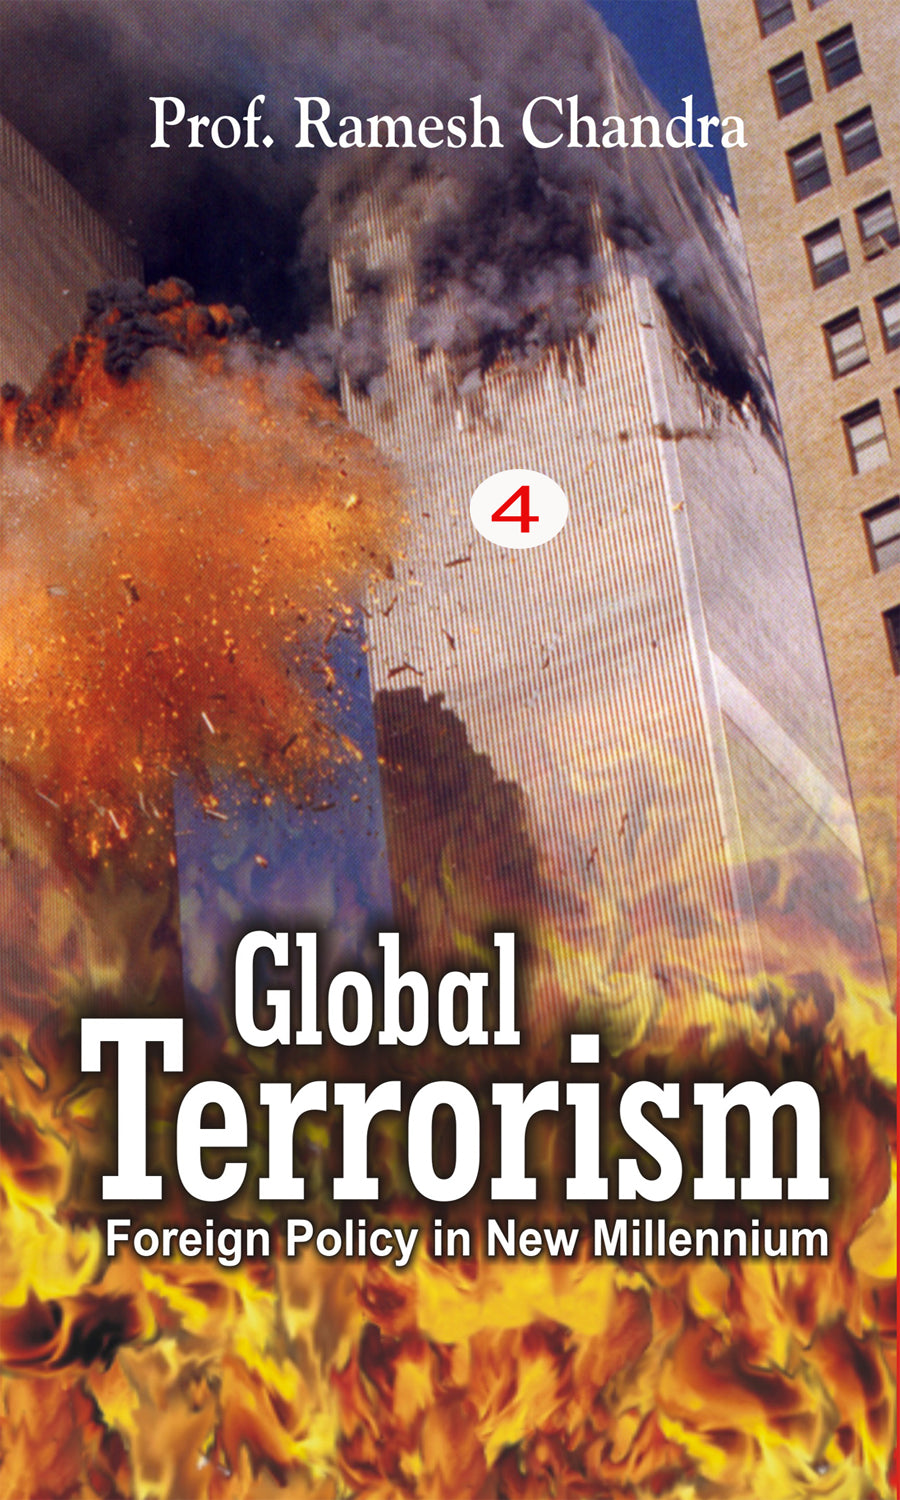 Global Terrorism: a Threat to Humanity (Terrorism in India) Volume Vol. 6th [Hardcover]